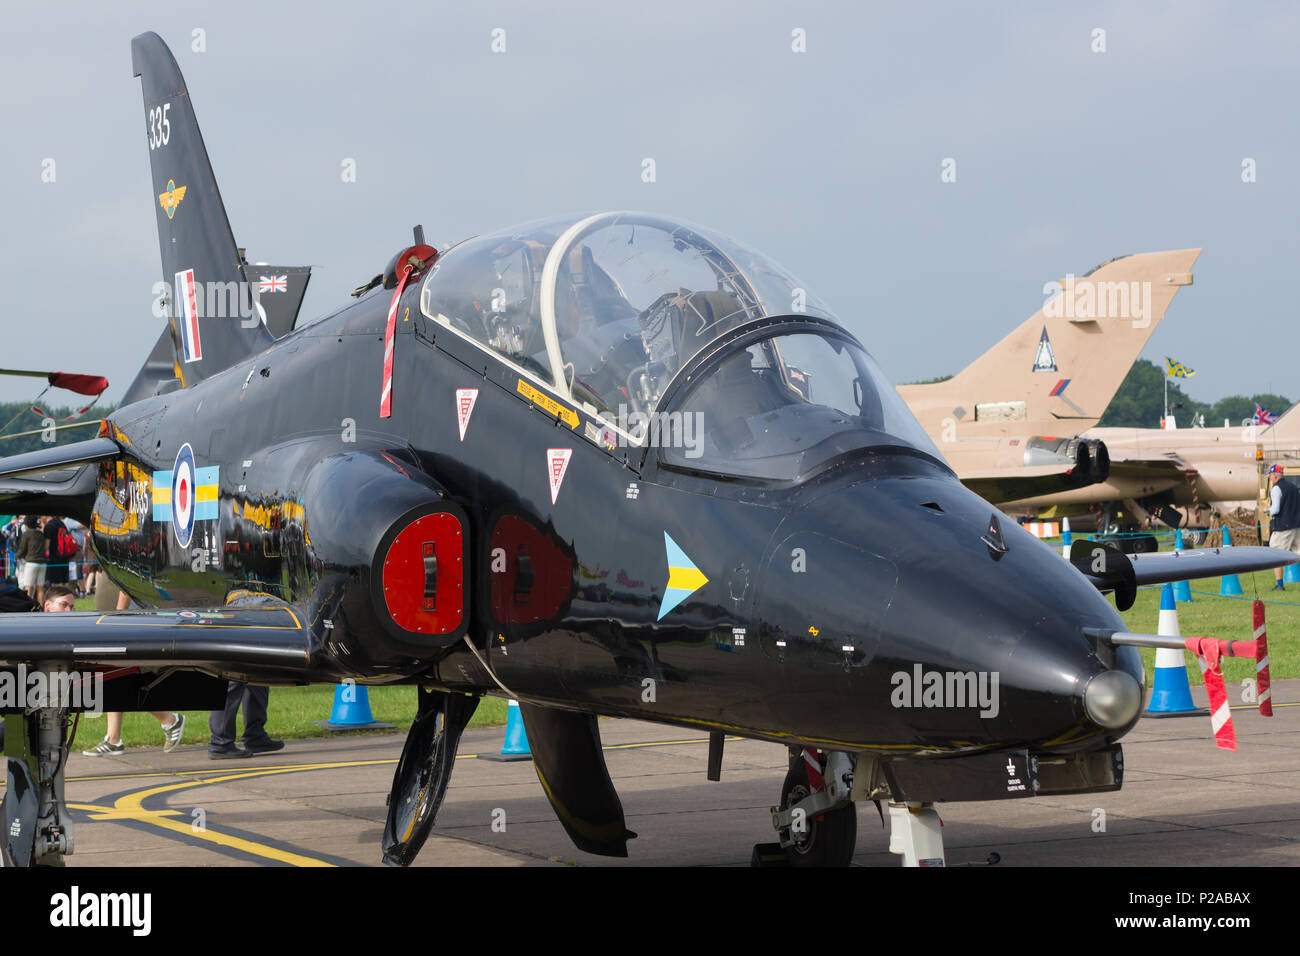 BAe Systems Hawk T.1 a two seat jet airplane used as an advanced training aircraft by the Royal Air Force Stock Photo